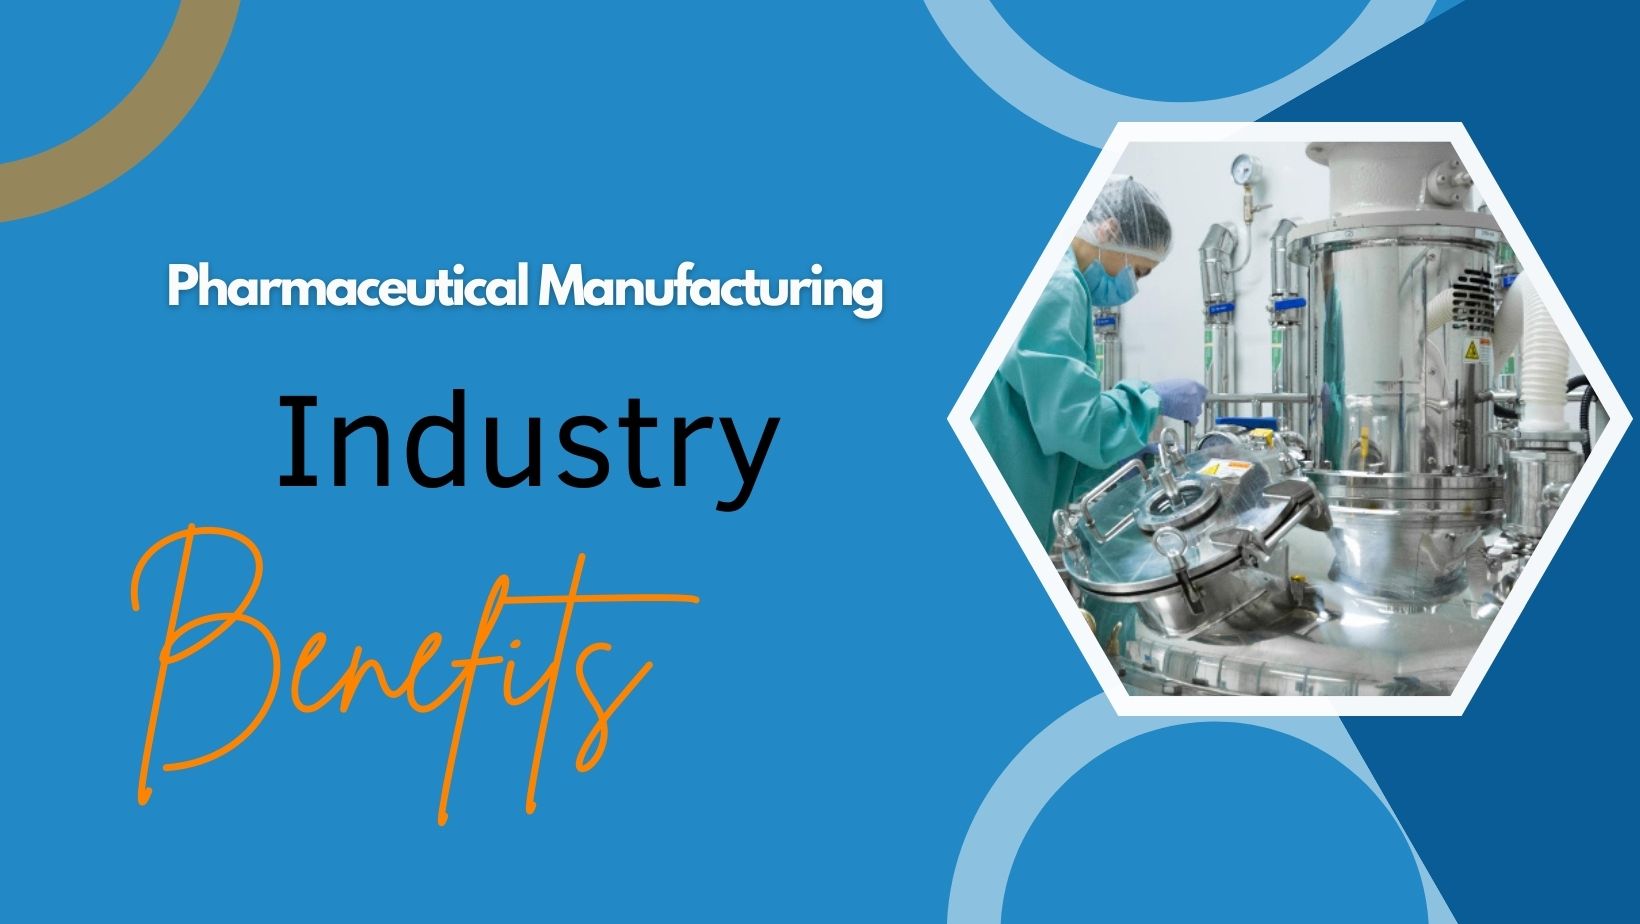 pharmaceutical-manufacturing-industry-benefits